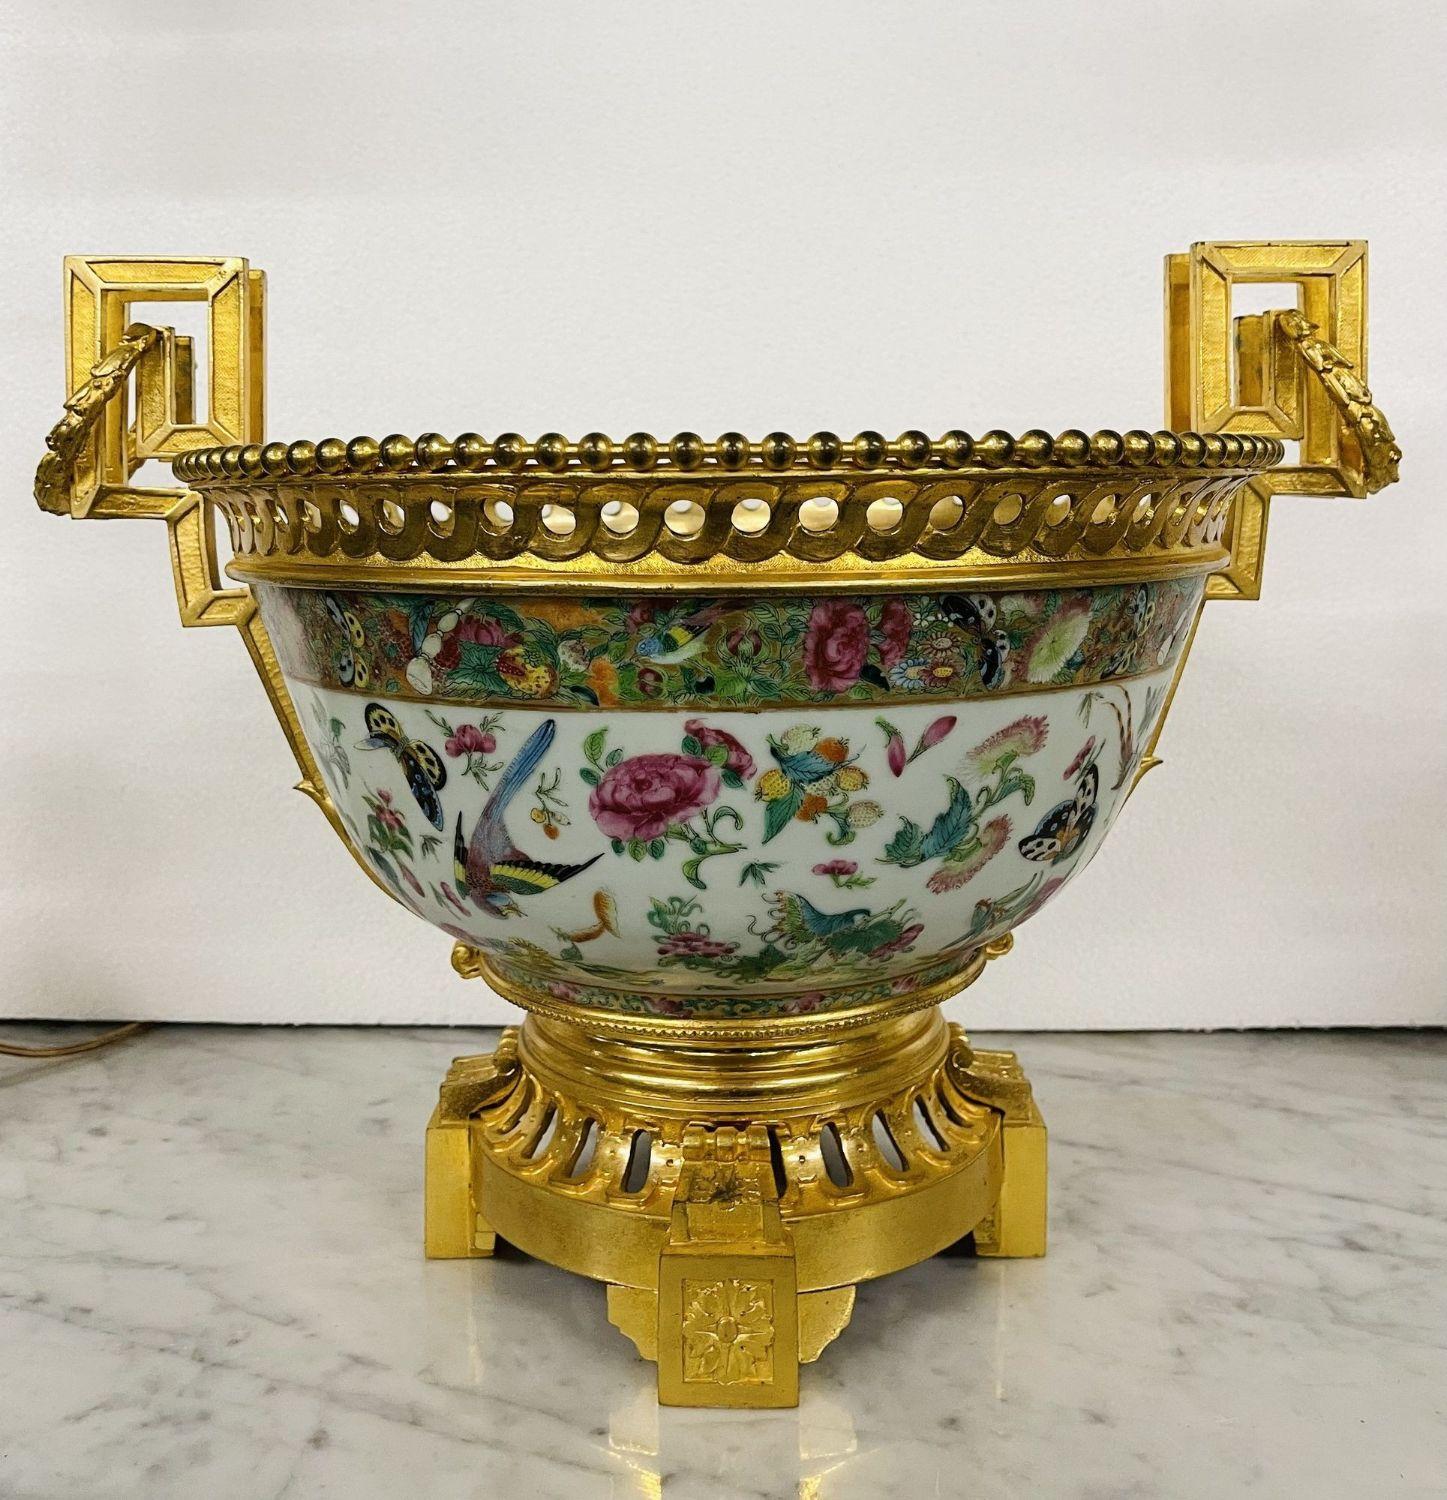 Chinese gilt-bronze mounted rose medallion center piece bowl, 19th century. A stunning Centerpiece of Chinese deisgn having a circular tapering form, with pierced Greek key designed rim, flanked by similar scroll handles, raised on a socle and